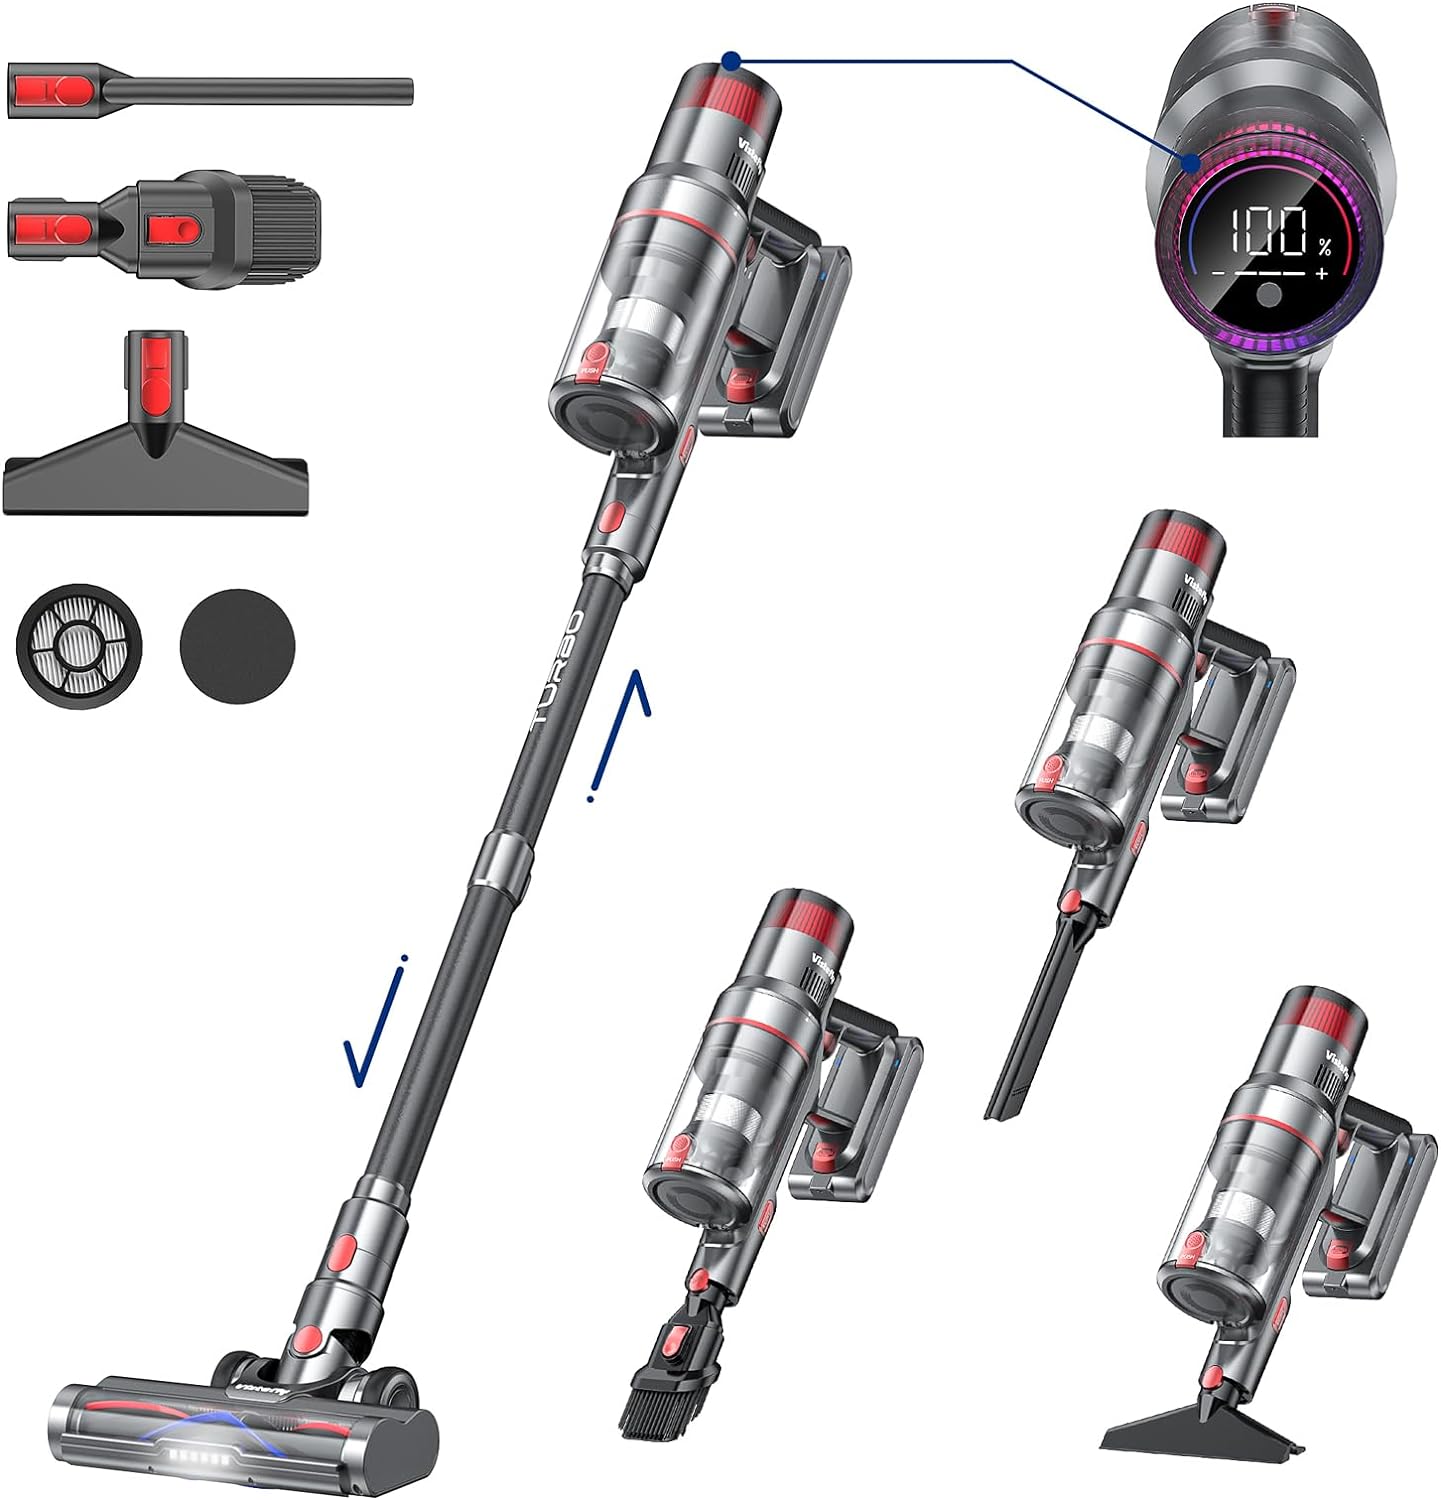 Vistefly Cordless Vacuum Cleaner Review: Powerful Cleaning Tool with Long Battery Life